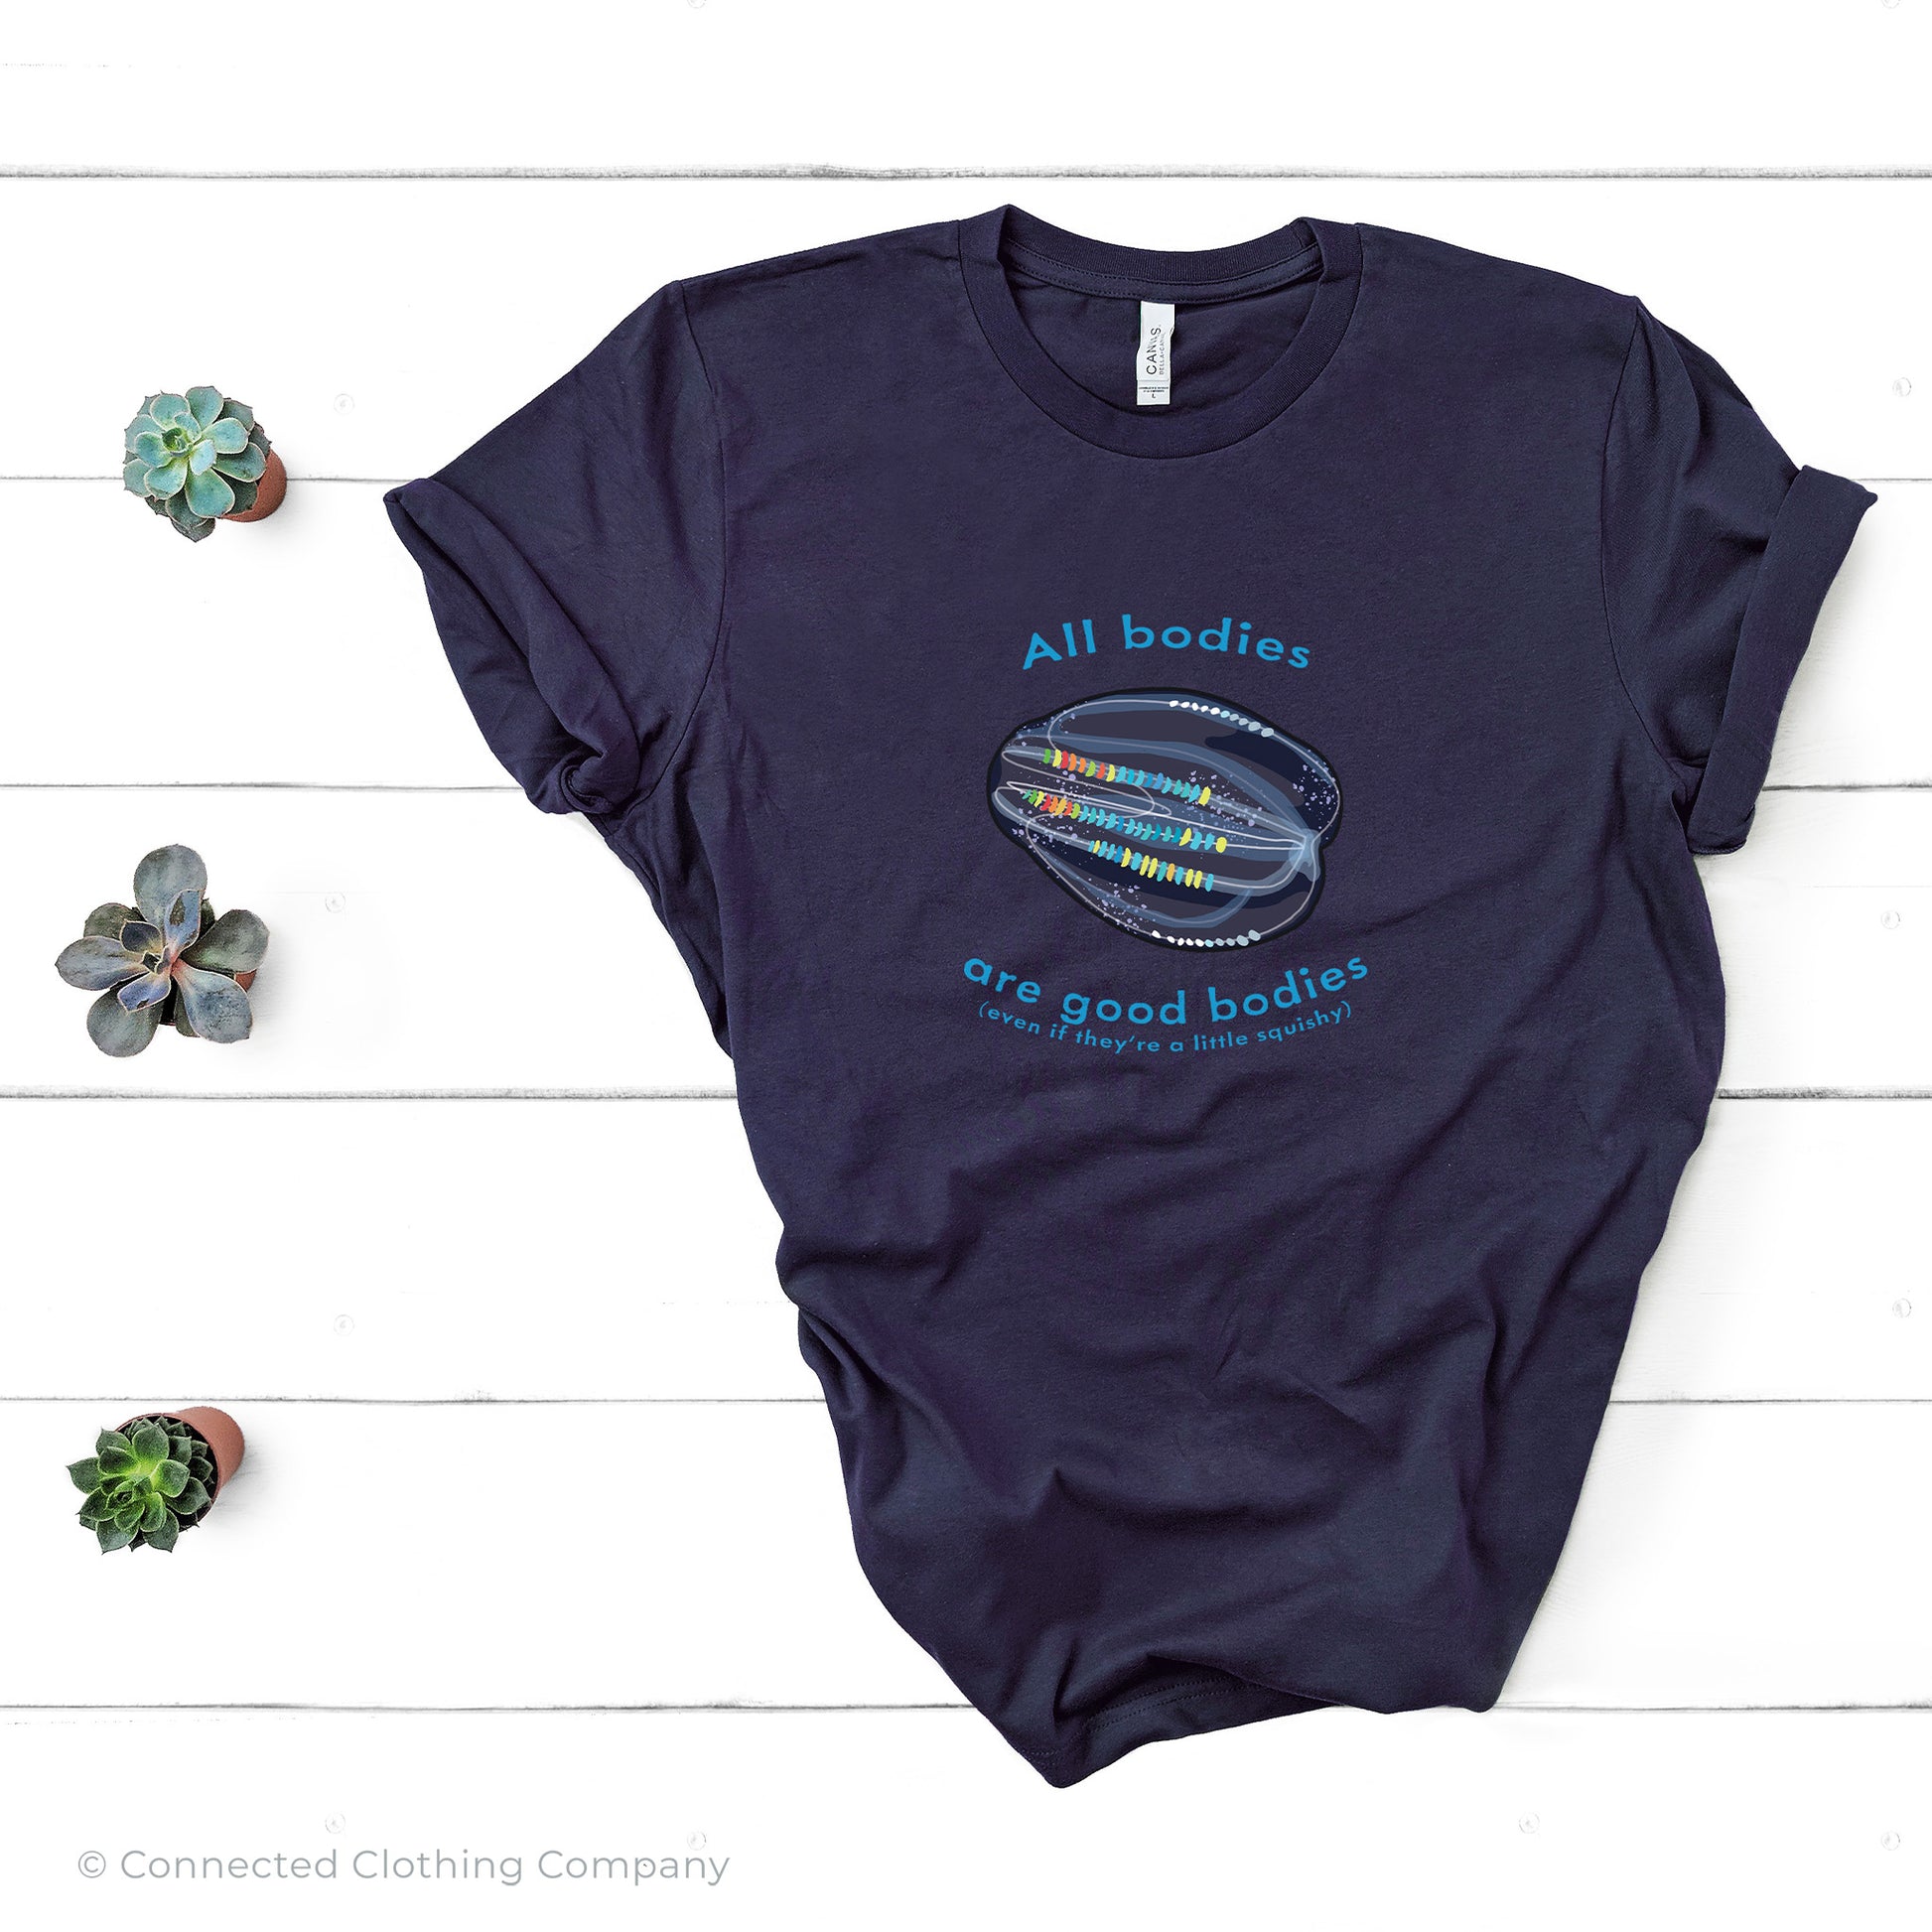 Navy All Bodies Are Good Bodies Tee reads "All bodies are good bodies (even if they're a little squishy)." and has a comb jelly ctenophore illustration - Connected Clothing Company - Ethically and Sustainably Made - 10% donated to Mission Blue ocean conservation